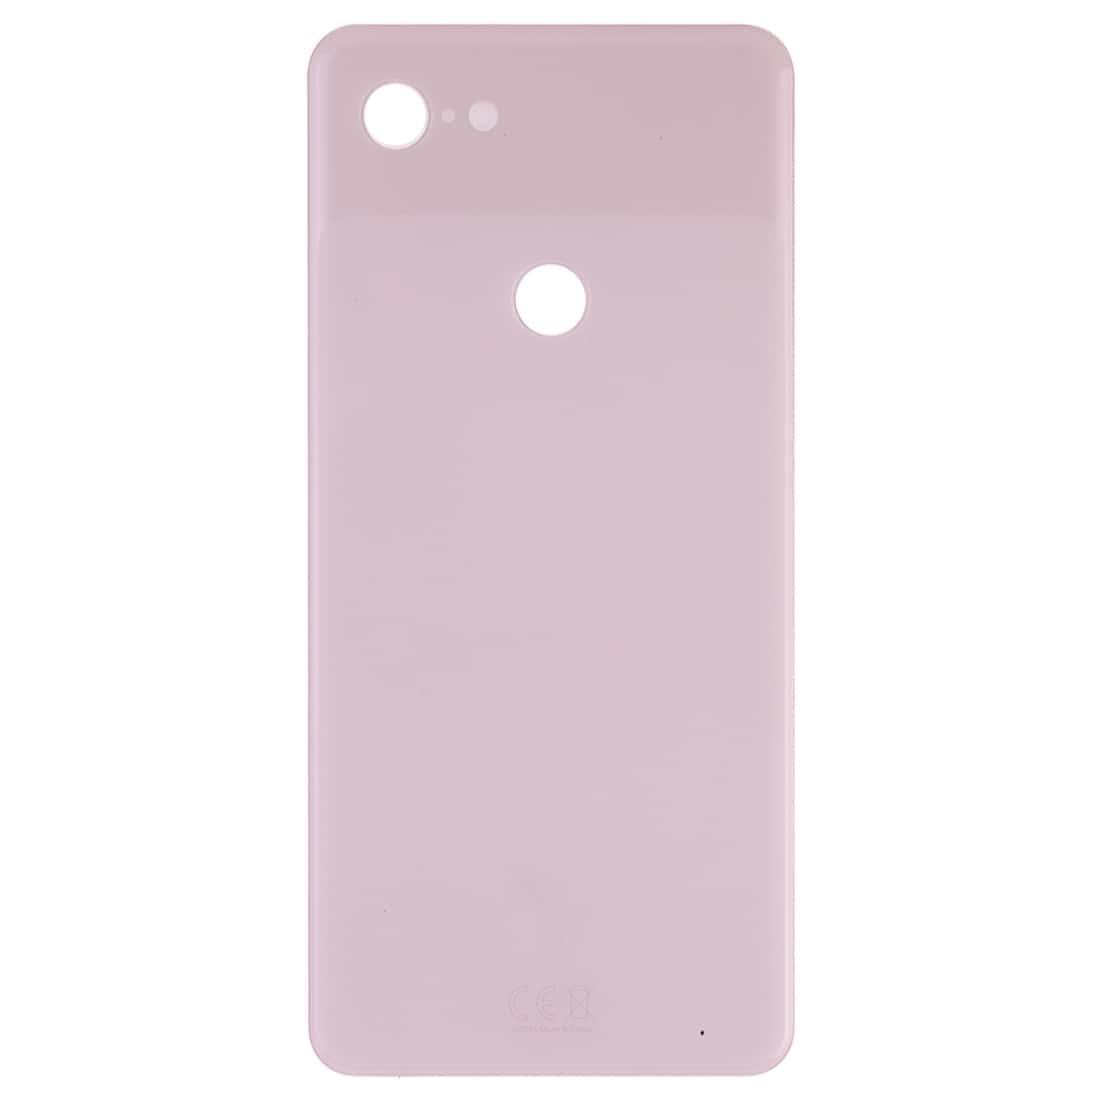 Back Glass Panel for  Google Pixel 3 XL Pink